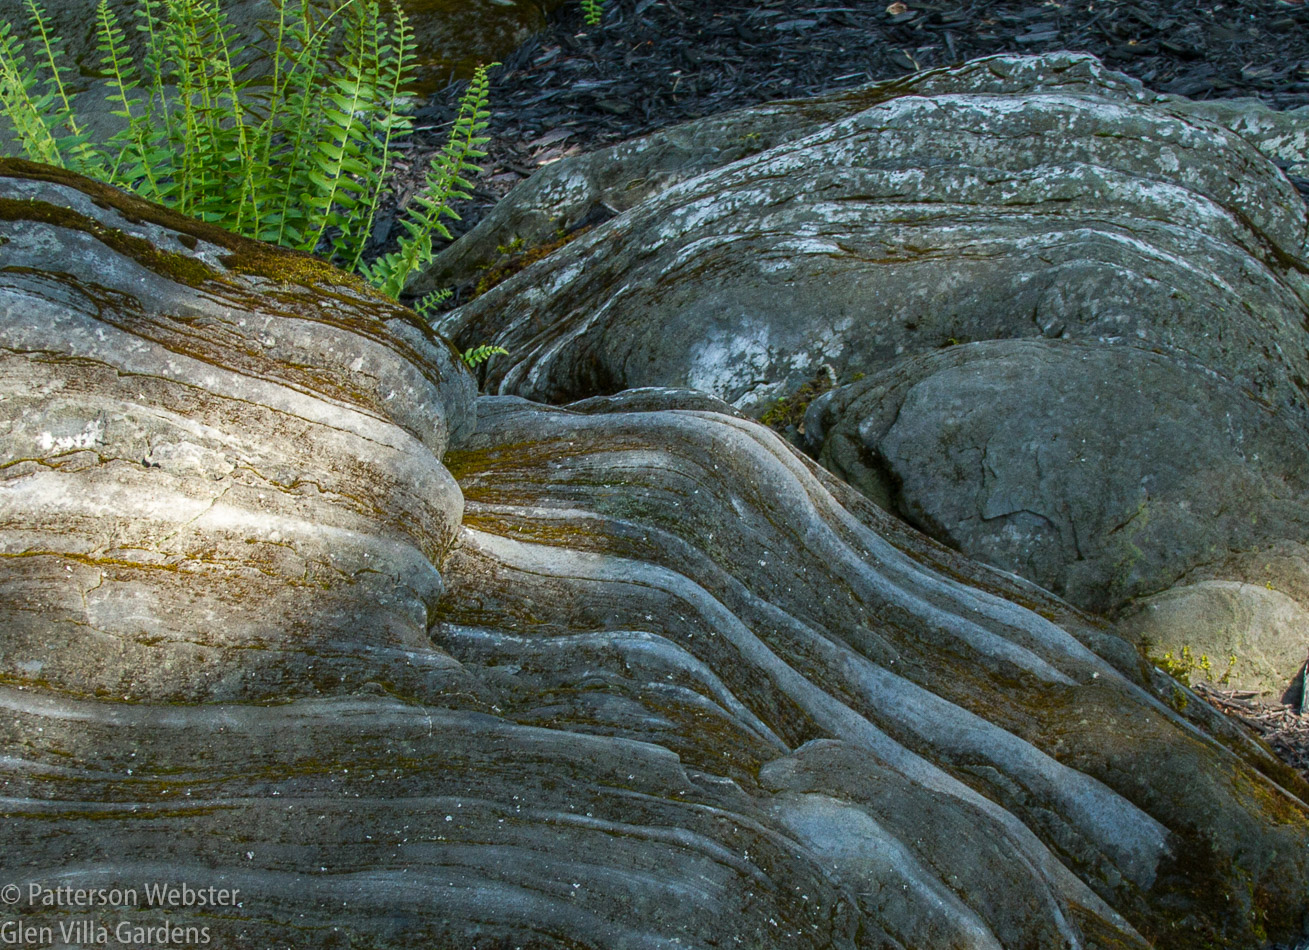 Striations in the rock suggest ripples in a stream. 